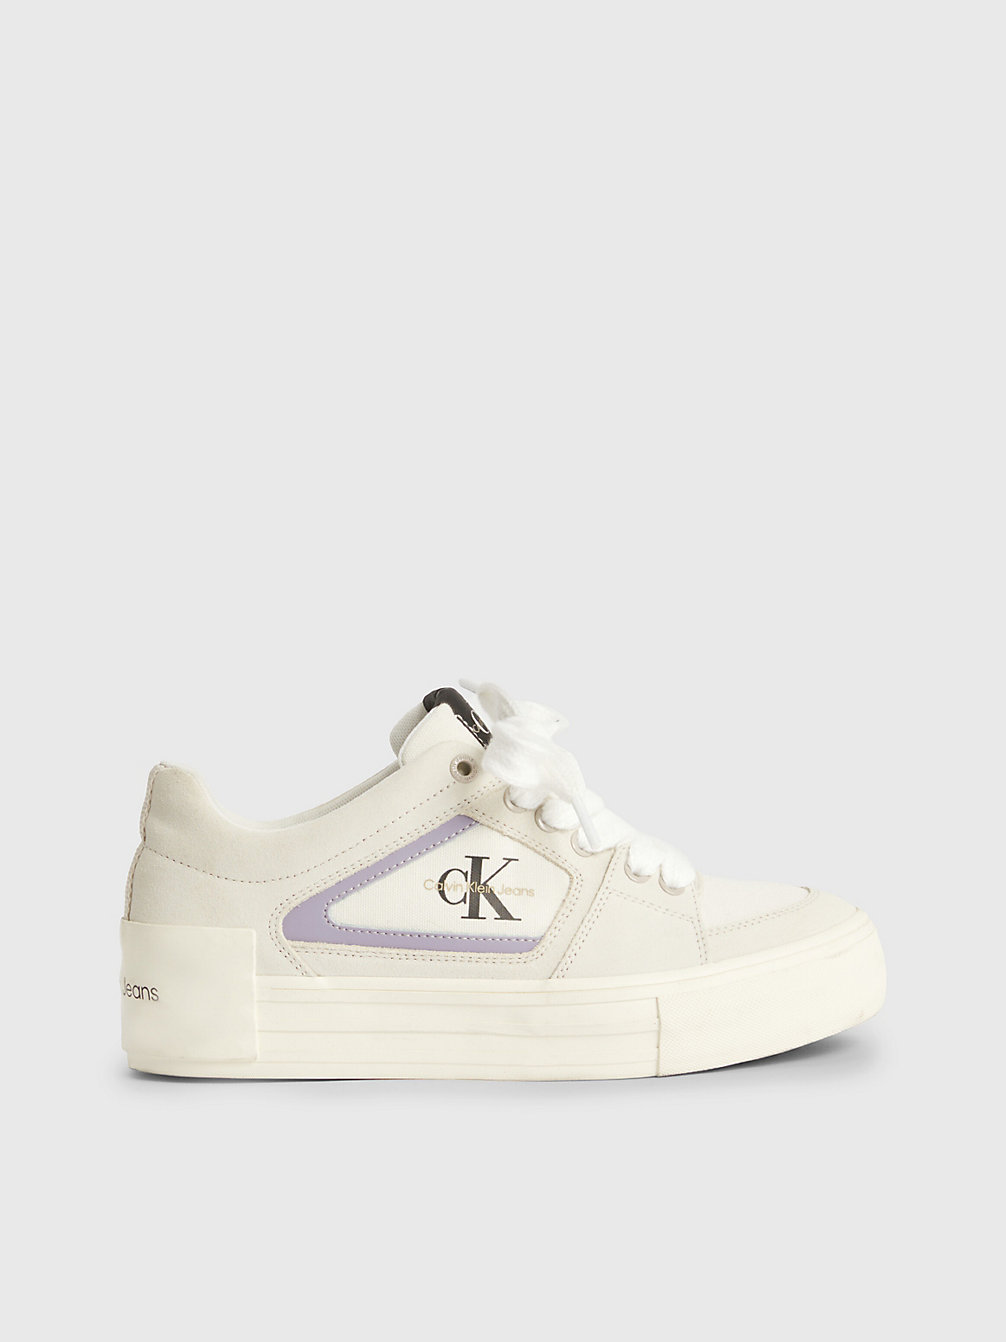 EGGSHELL / CREAMY WHITE > Suède Plateausneakers > undefined dames - Calvin Klein